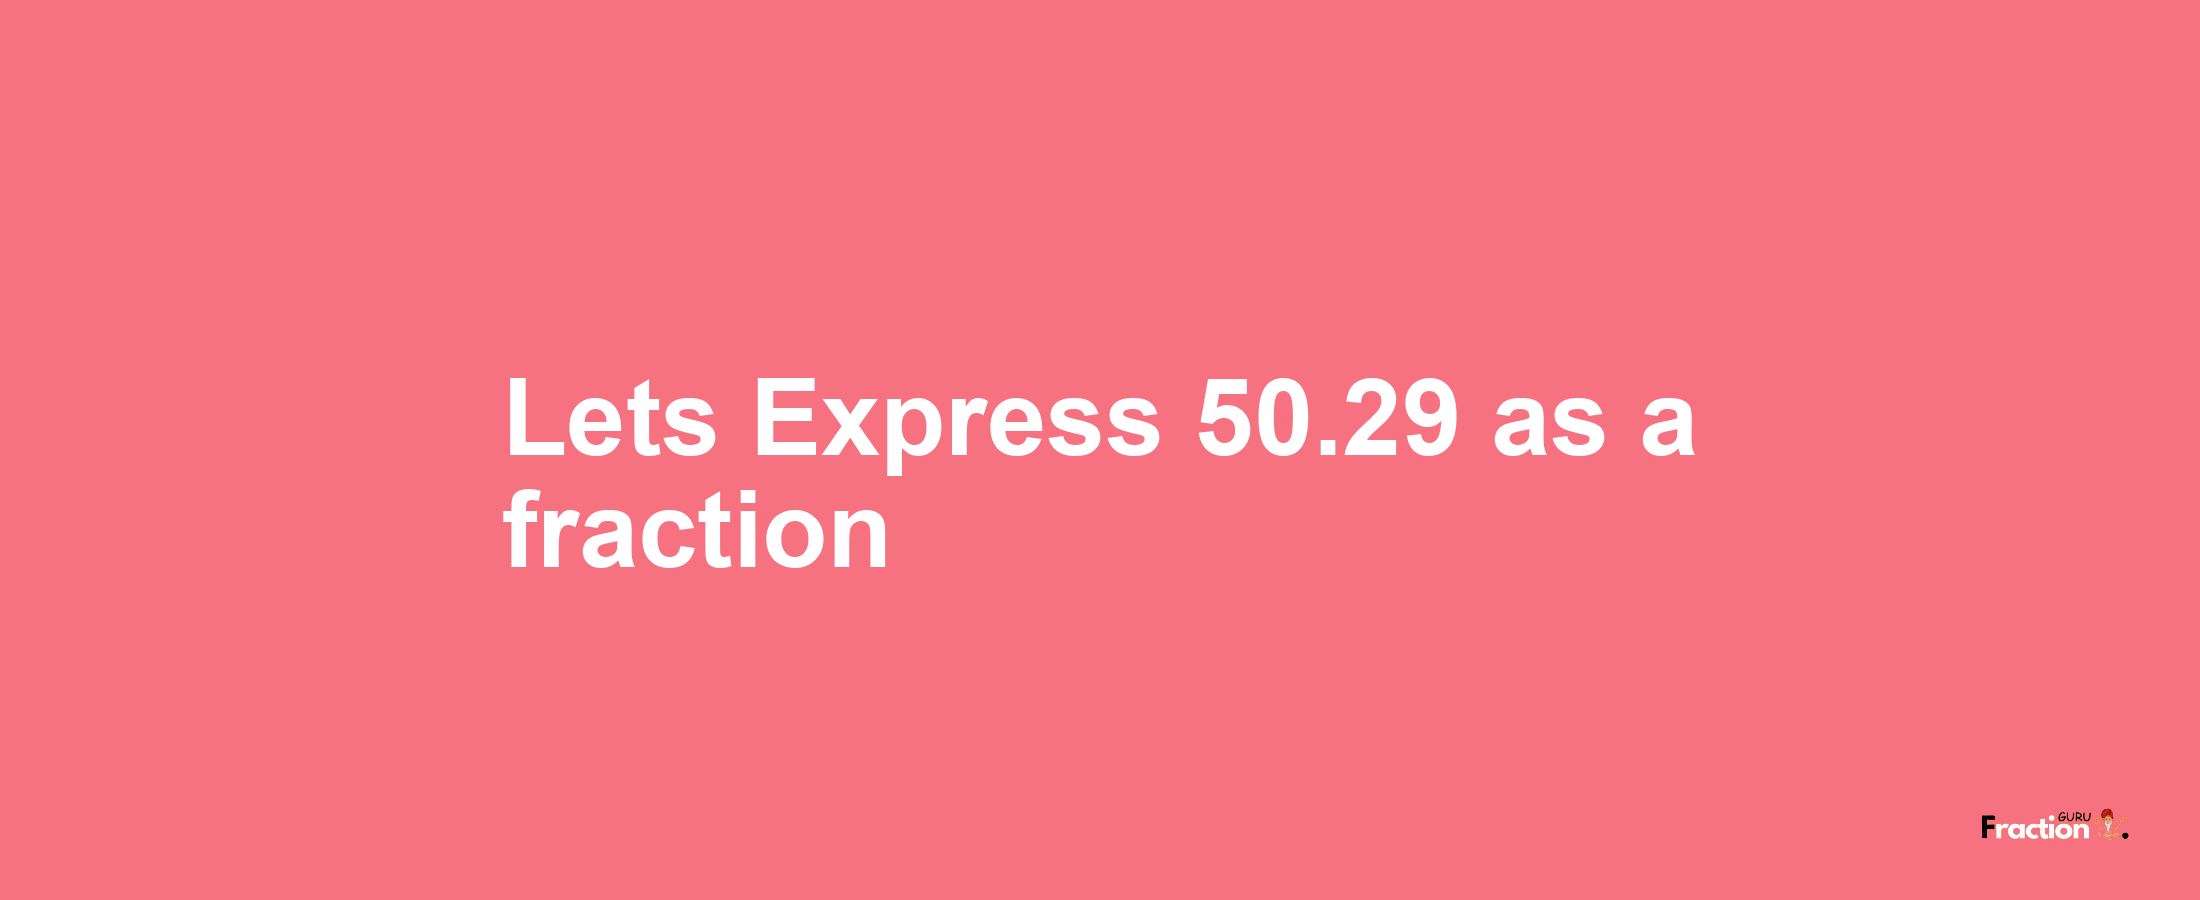 Lets Express 50.29 as afraction